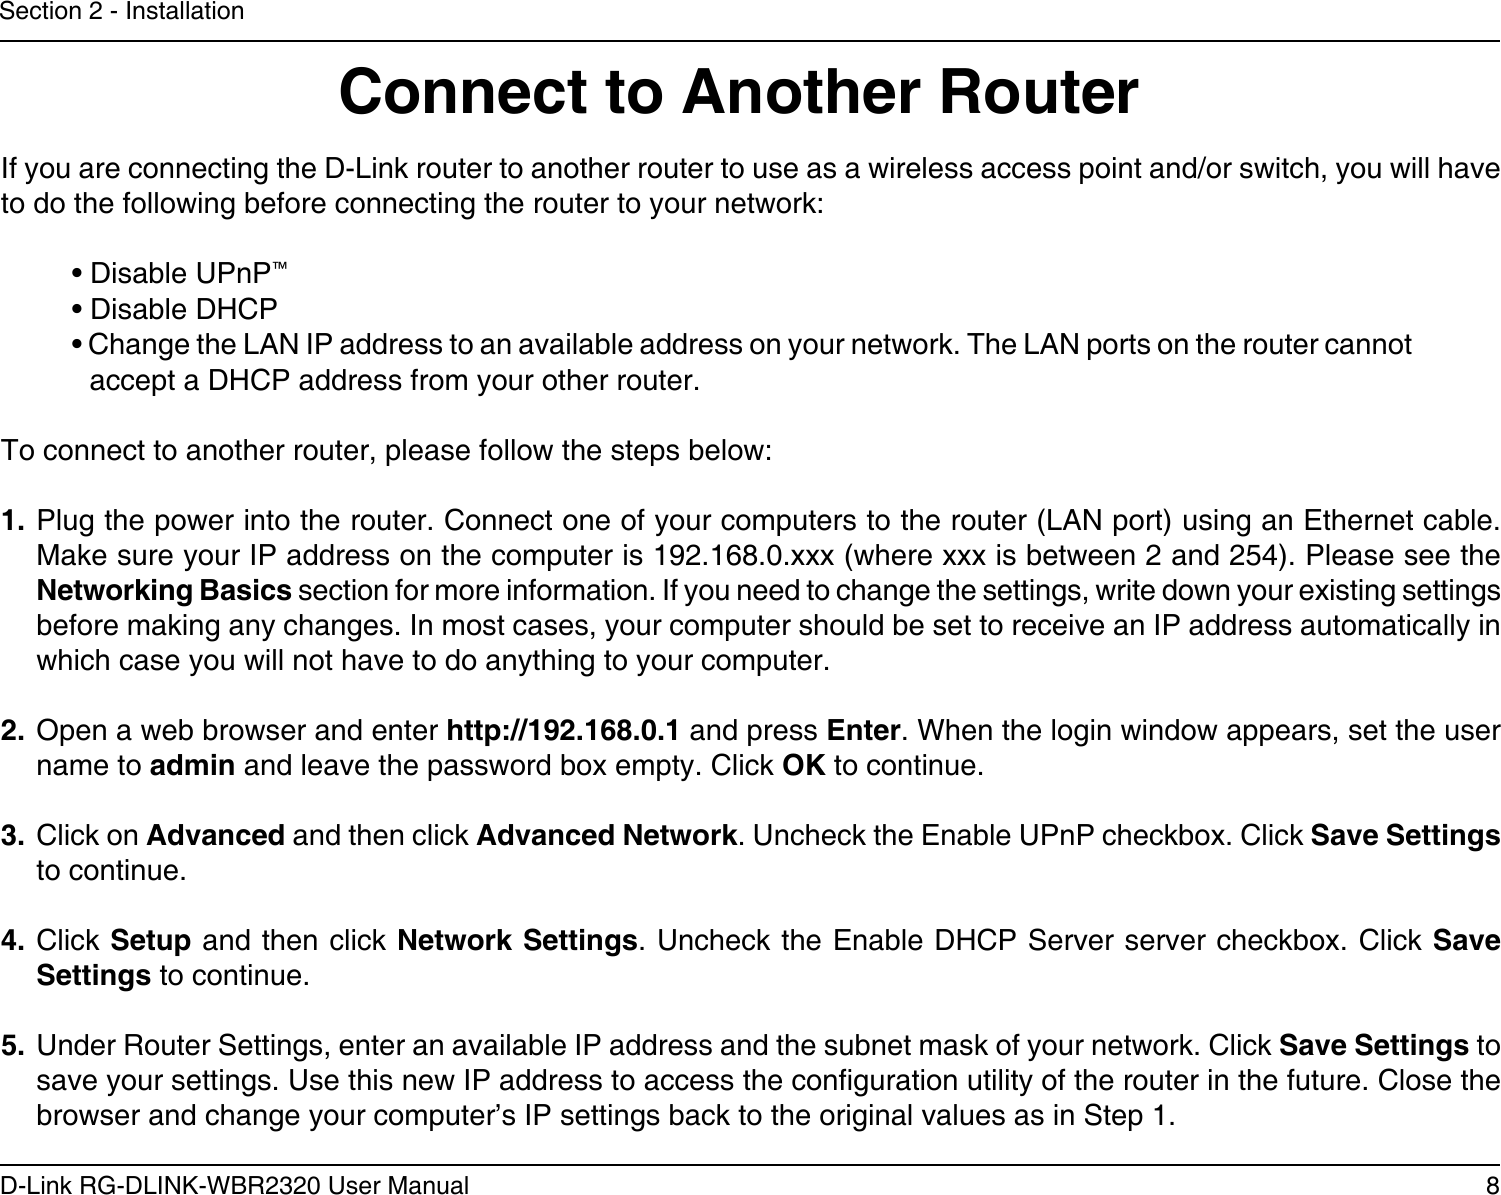 8D-Link RG-DLINK-WBR2320 User ManualSection 2 - InstallationIf you are connecting the D-Link router to another router to use as a wireless access point and/or switch, you will have to do the following before connecting the router to your network:• Disable UPnP™• Disable DHCP• Change the LAN IP address to an available address on your network. The LAN ports on the router cannot accept a DHCP address from your other router.To connect to another router, please follow the steps below:1. Plug the power into the router. Connect one of your computers to the router (LAN port) using an Ethernet cable. Make sure your IP address on the computer is 192.168.0.xxx (where xxx is between 2 and 254). Please see the Networking Basics section for more information. If you need to change the settings, write down your existing settings before making any changes. In most cases, your computer should be set to receive an IP address automatically in which case you will not have to do anything to your computer.2. Open a web browser and enter http://192.168.0.1 and press Enter. When the login window appears, set the user name to admin and leave the password box empty. Click OK to continue.3. Click on Advanced and then click Advanced Network. Uncheck the Enable UPnP checkbox. Click Save Settings to continue. 4. Click Setup and then click Network Settings. Uncheck the Enable DHCP Server server checkbox. Click Save Settings to continue.5. Under Router Settings, enter an available IP address and the subnet mask of your network. Click Save Settings to save your settings. Use this new IP address to access the conguration utility of the router in the future. Close the browser and change your computer’s IP settings back to the original values as in Step 1.Connect to Another Router